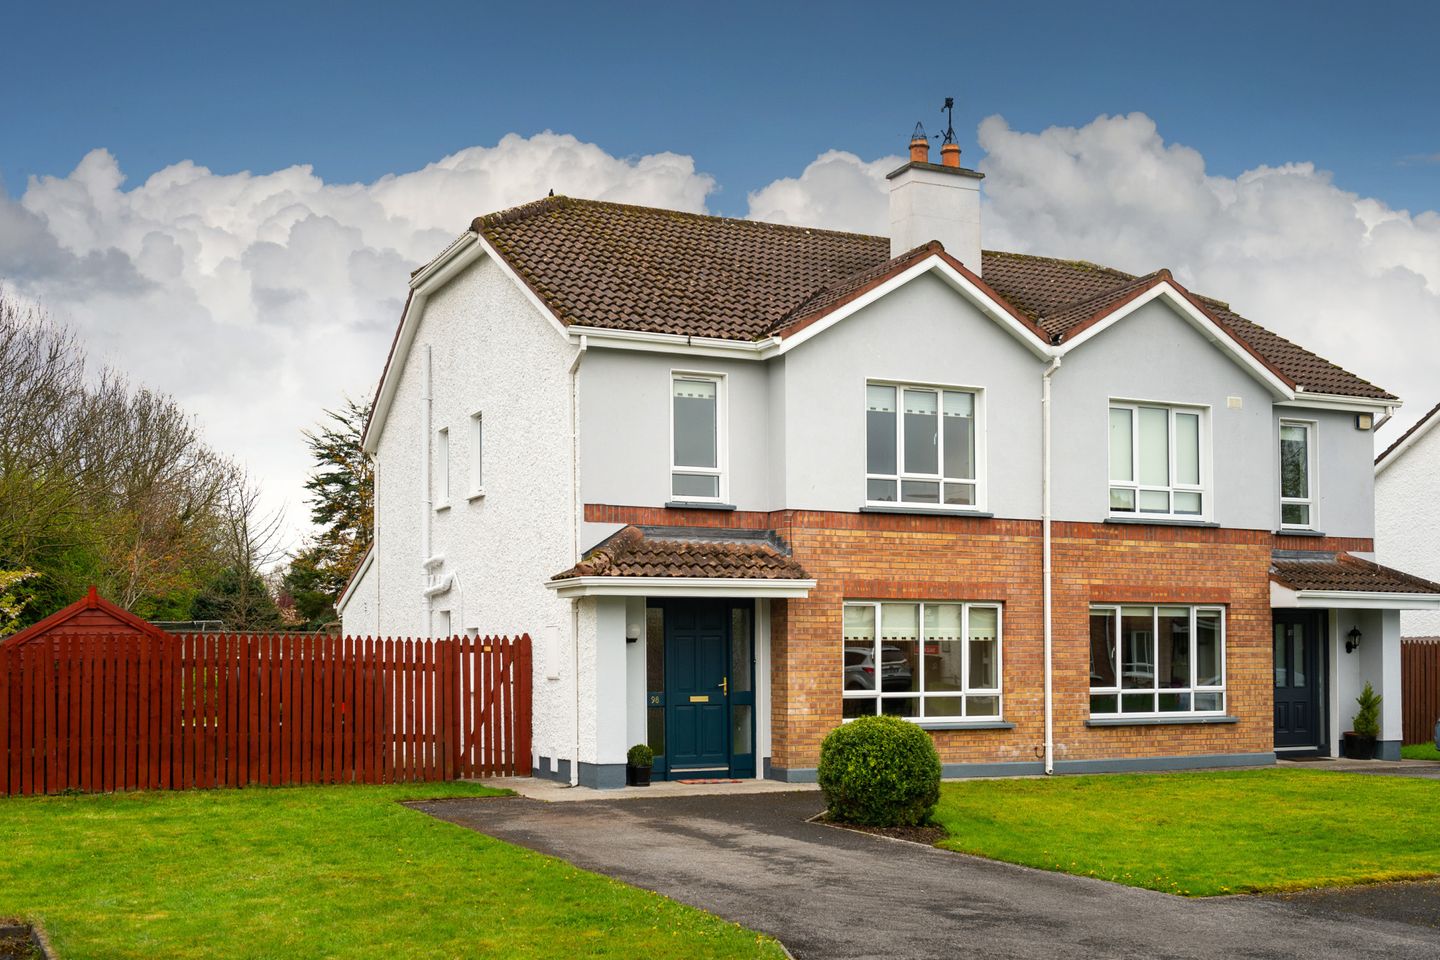 98 Clonminch Wood, Clonminch, Tullamore, Co Offaly, R35AE22